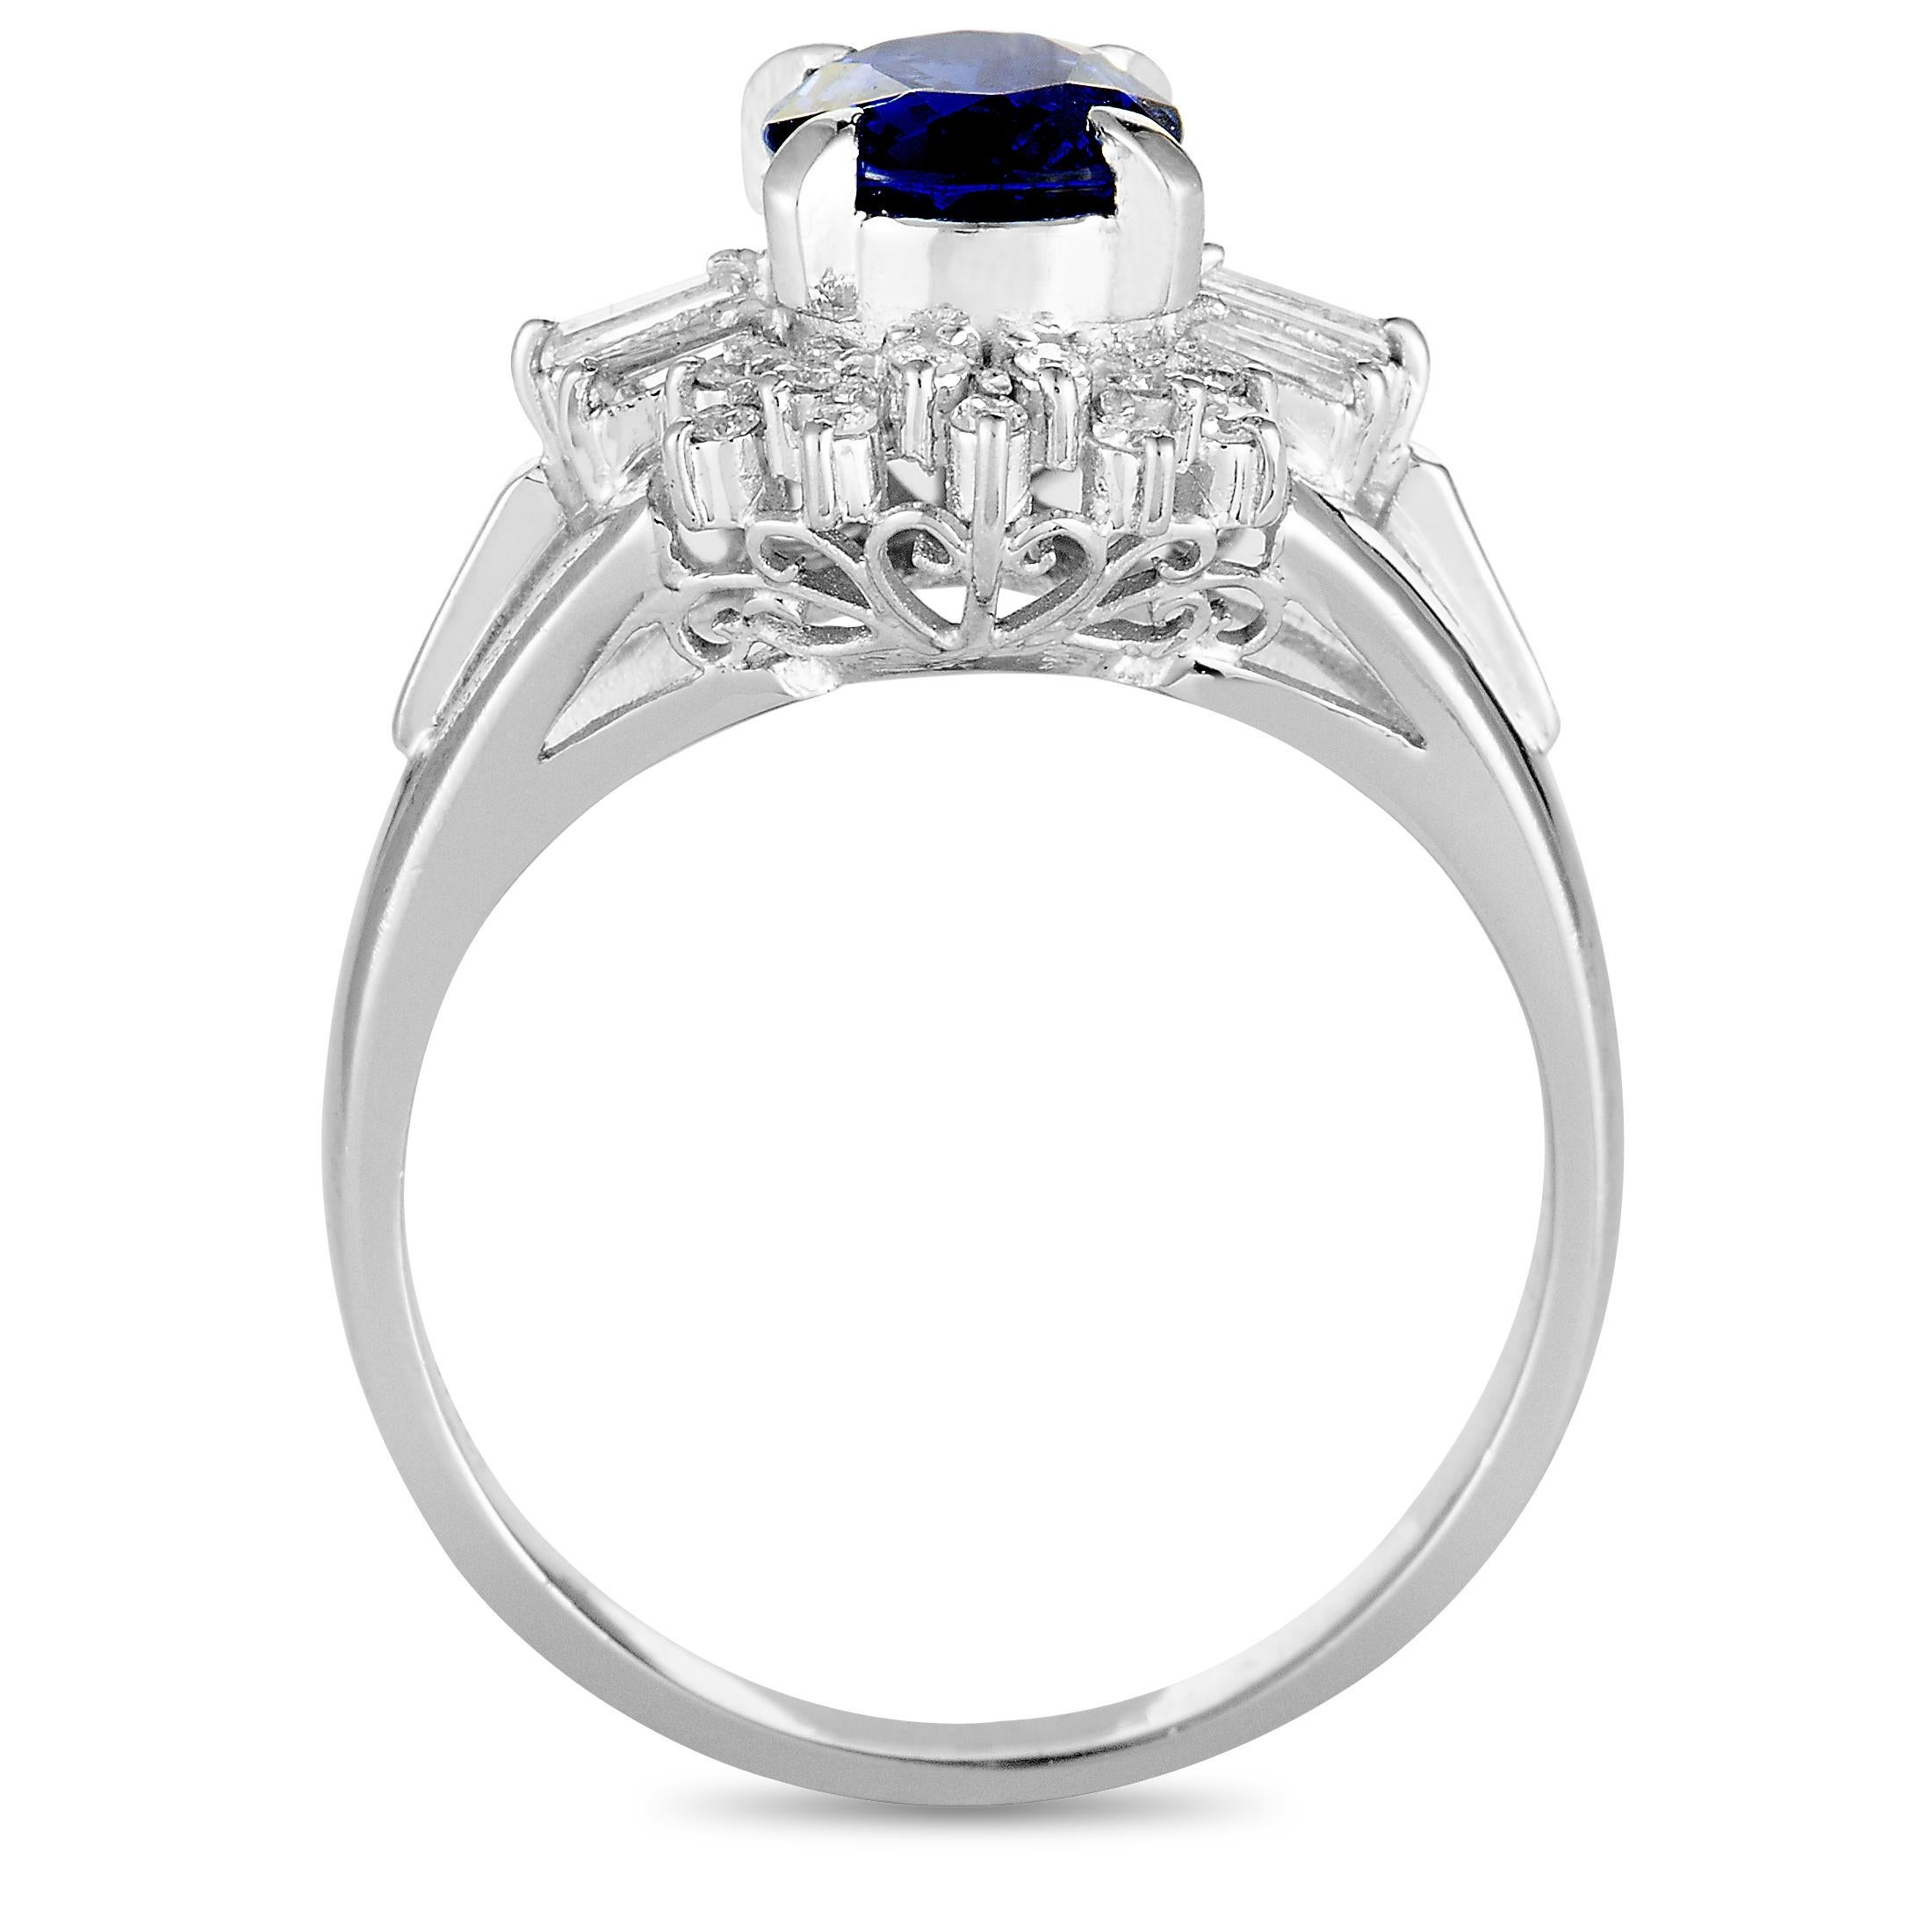 This ring is crafted from platinum and set with a sapphire that weighs 1.20 carats and with round and tapered baguette diamonds that amount to 0.19 carats. The ring weighs 5.9 grams, boasting band thickness of 2 mm and top height of 7 mm, while top